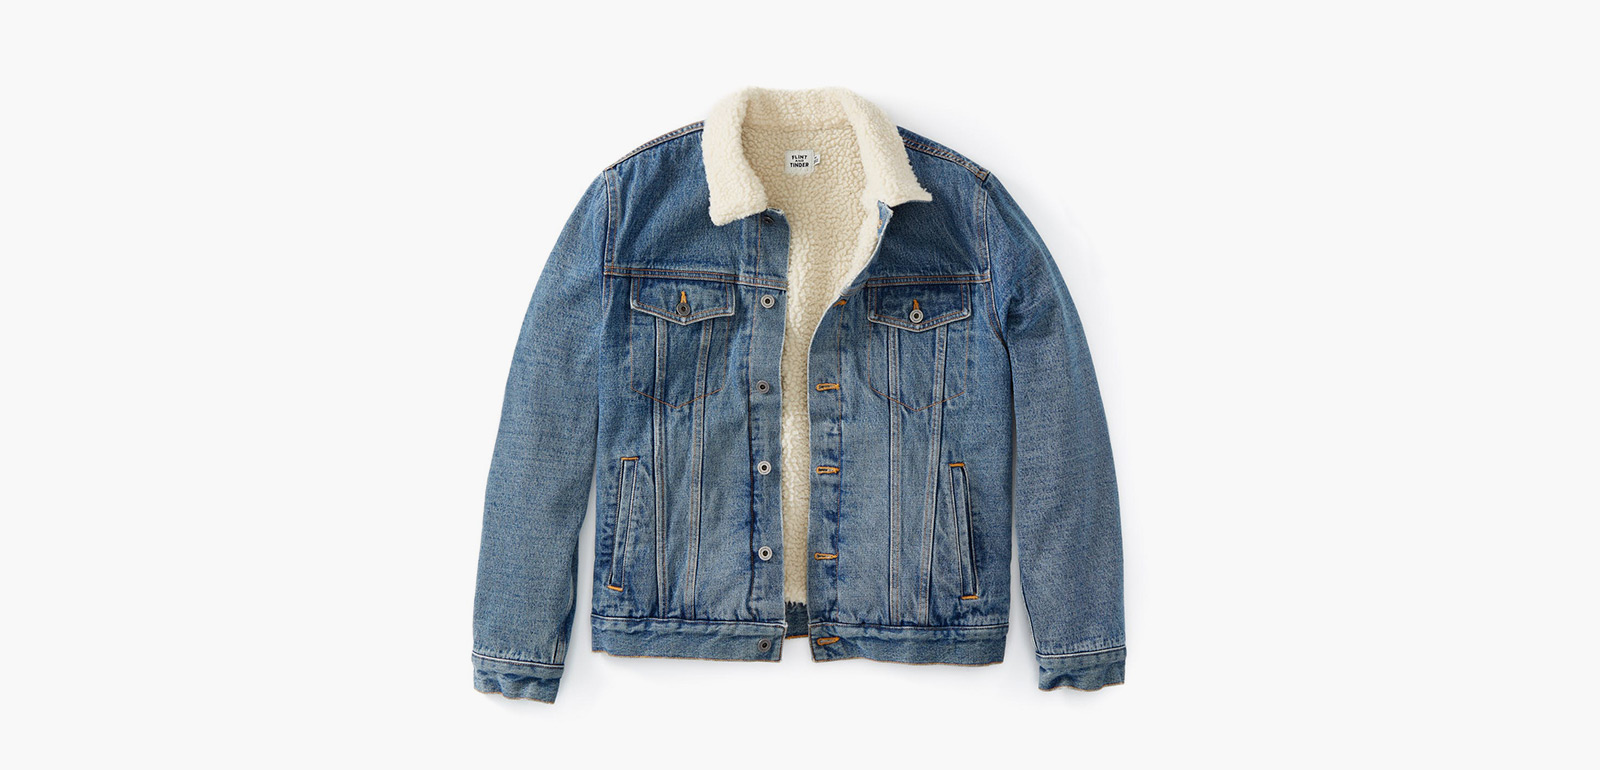 Flint and Tinder Type 3 Sherpa-Lined Trucker Jacket